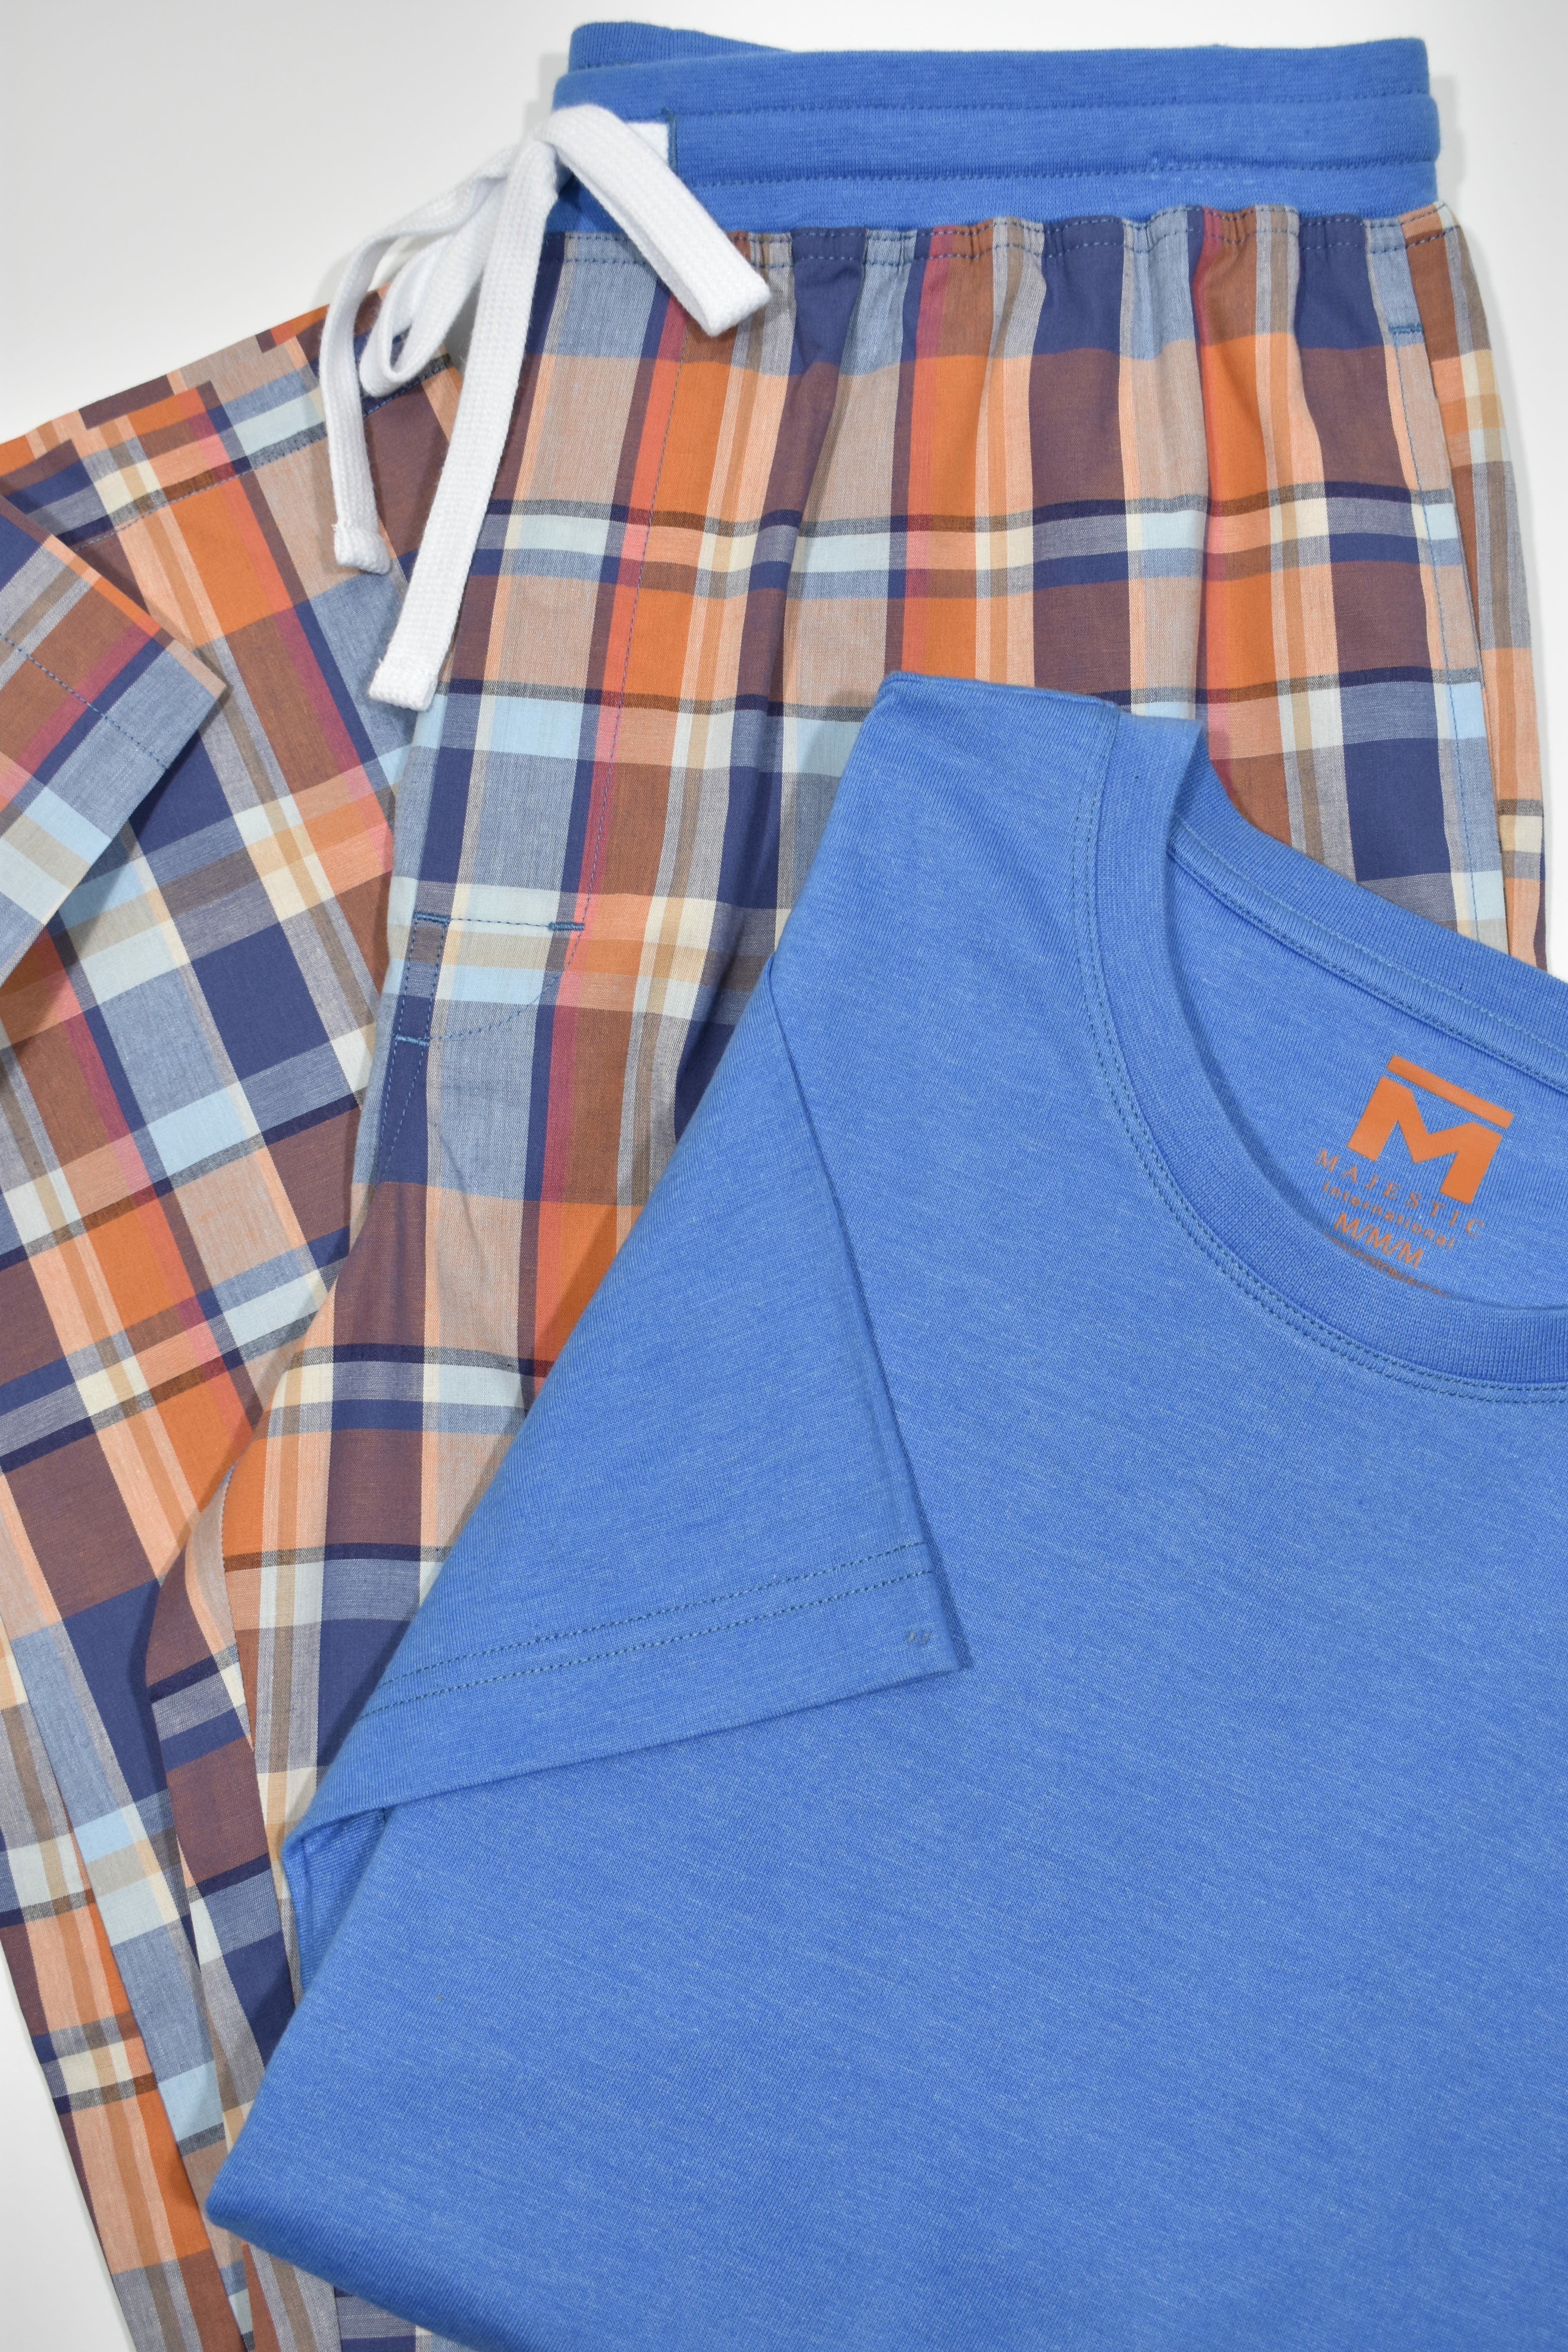 The Cavalier and Florida ZM21180 Leisure Set is perfect for Spring/Summer. Crafted from lightweight cotton, the drawstring pants feature a traditional plaid design in vibrant shades of orange and blue. Paired with a soft, royal blue Pima tee, this set offers both comfort and style. Perfect for relaxation and leisure time.